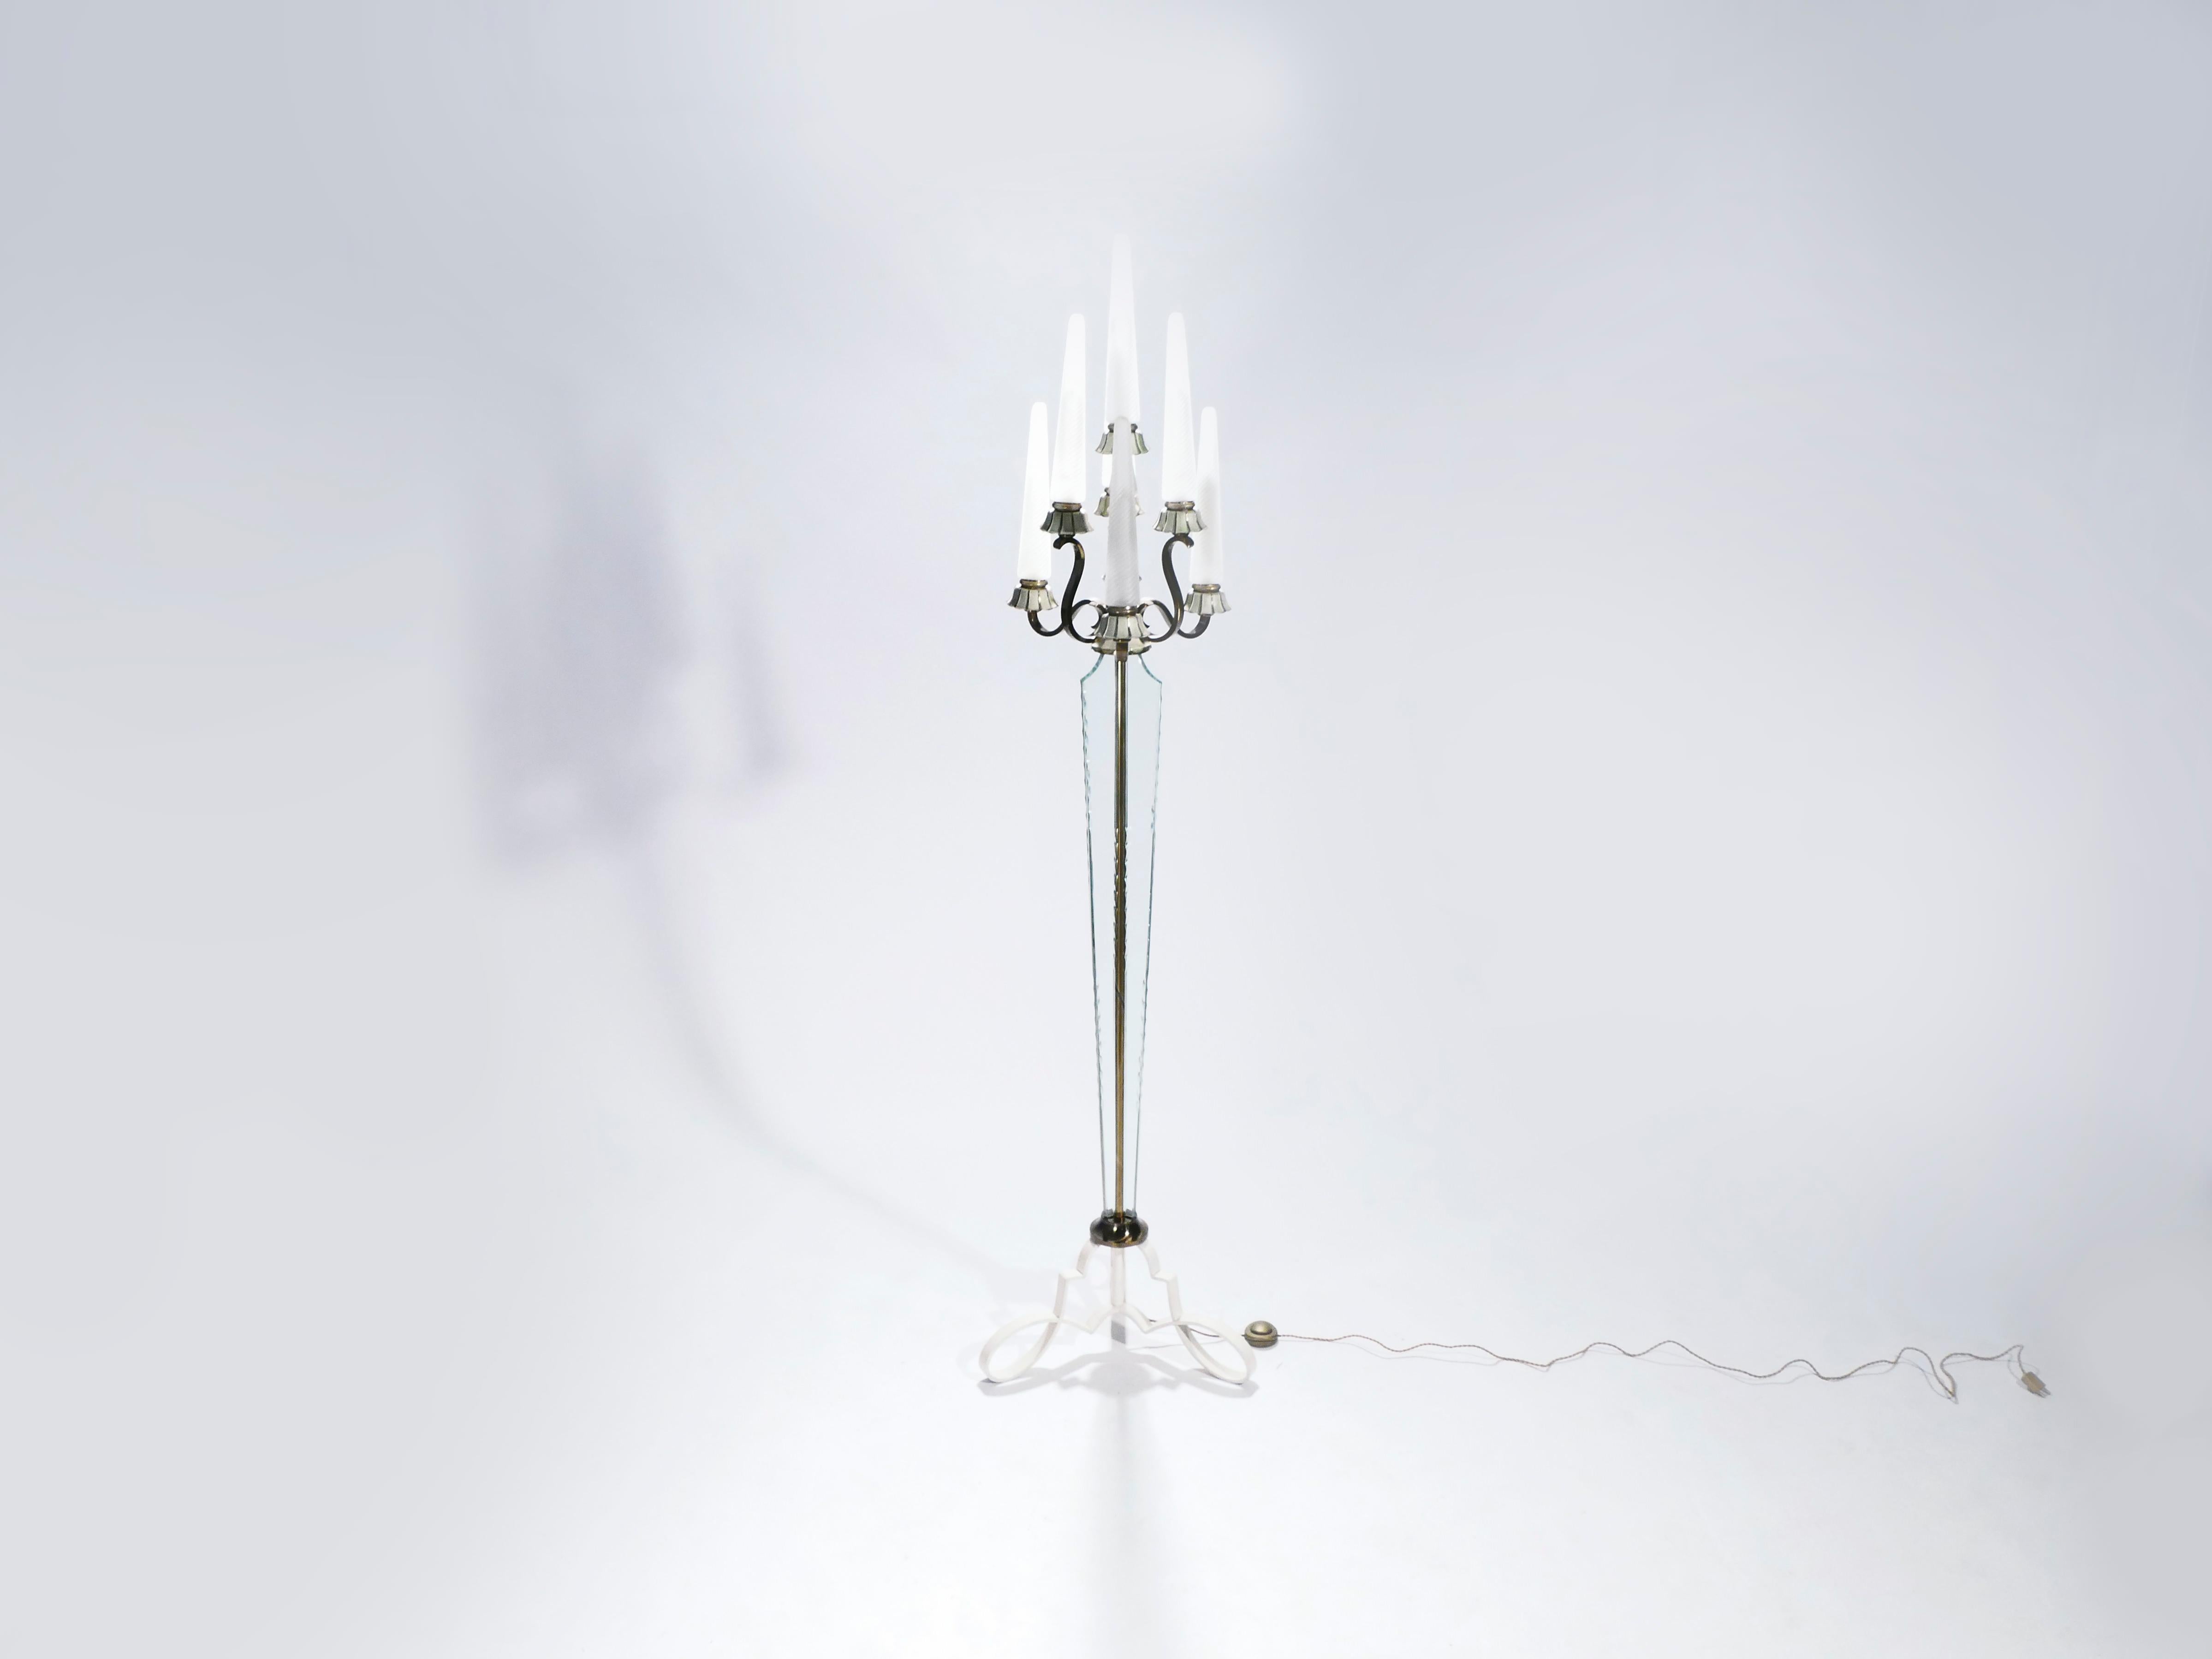 The craftsmanship of lighting designer Marius-Ernest Sabino and the crystal quality of la Cristallerie de Sèvres have come together in this unique Art Deco floor lamp. Bronze and iron form its formidable, vertical structure that draws the eye